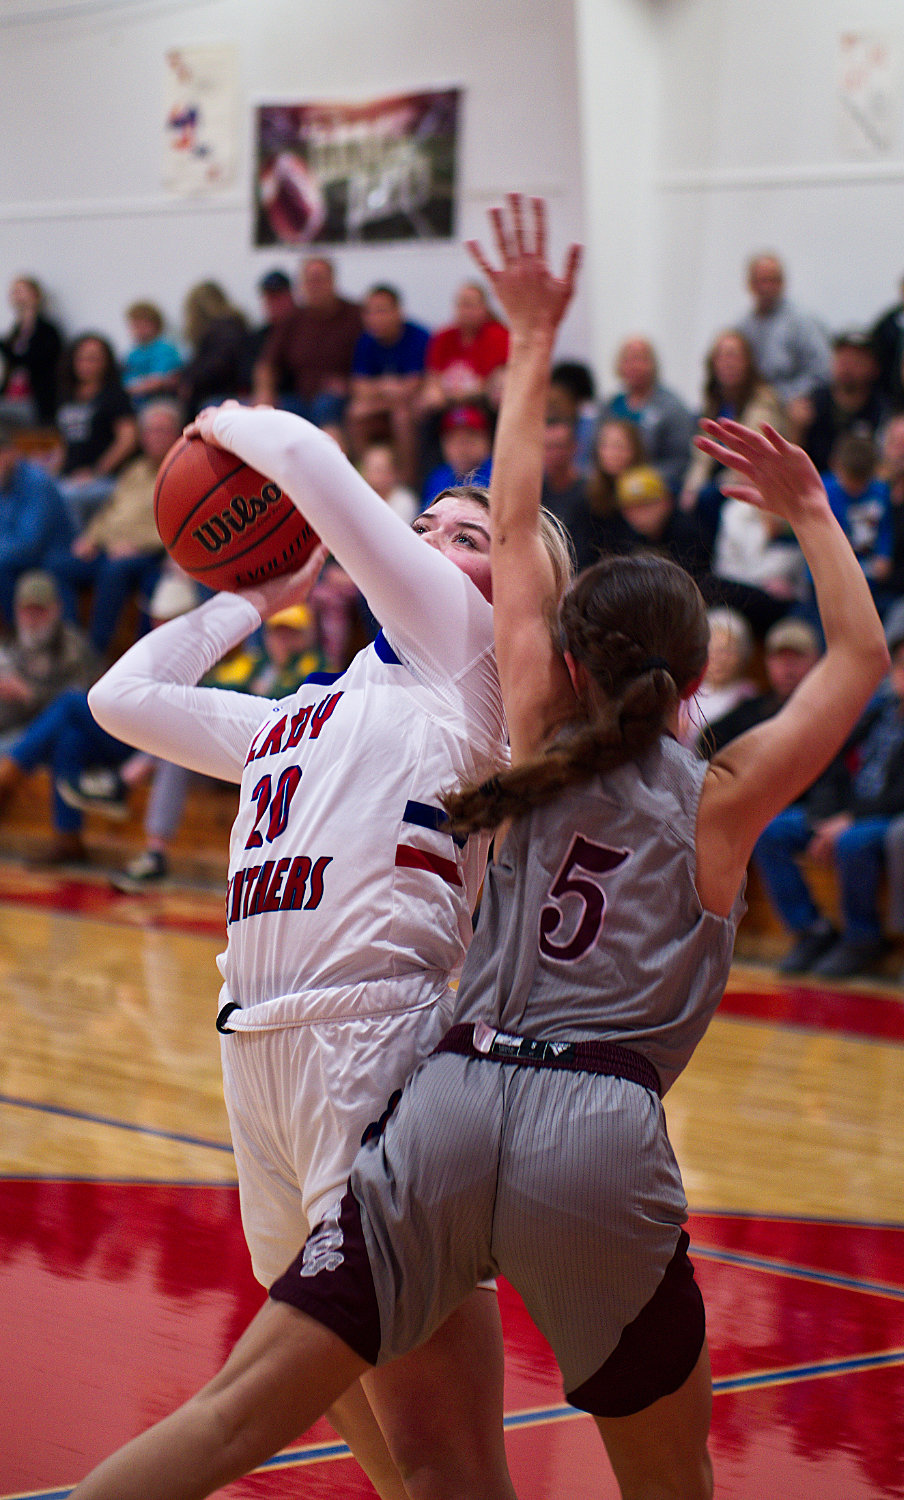 Alexis Wilmut goes up strong, earning a trip to the free throw line. [see more shots, buy basketball photos]